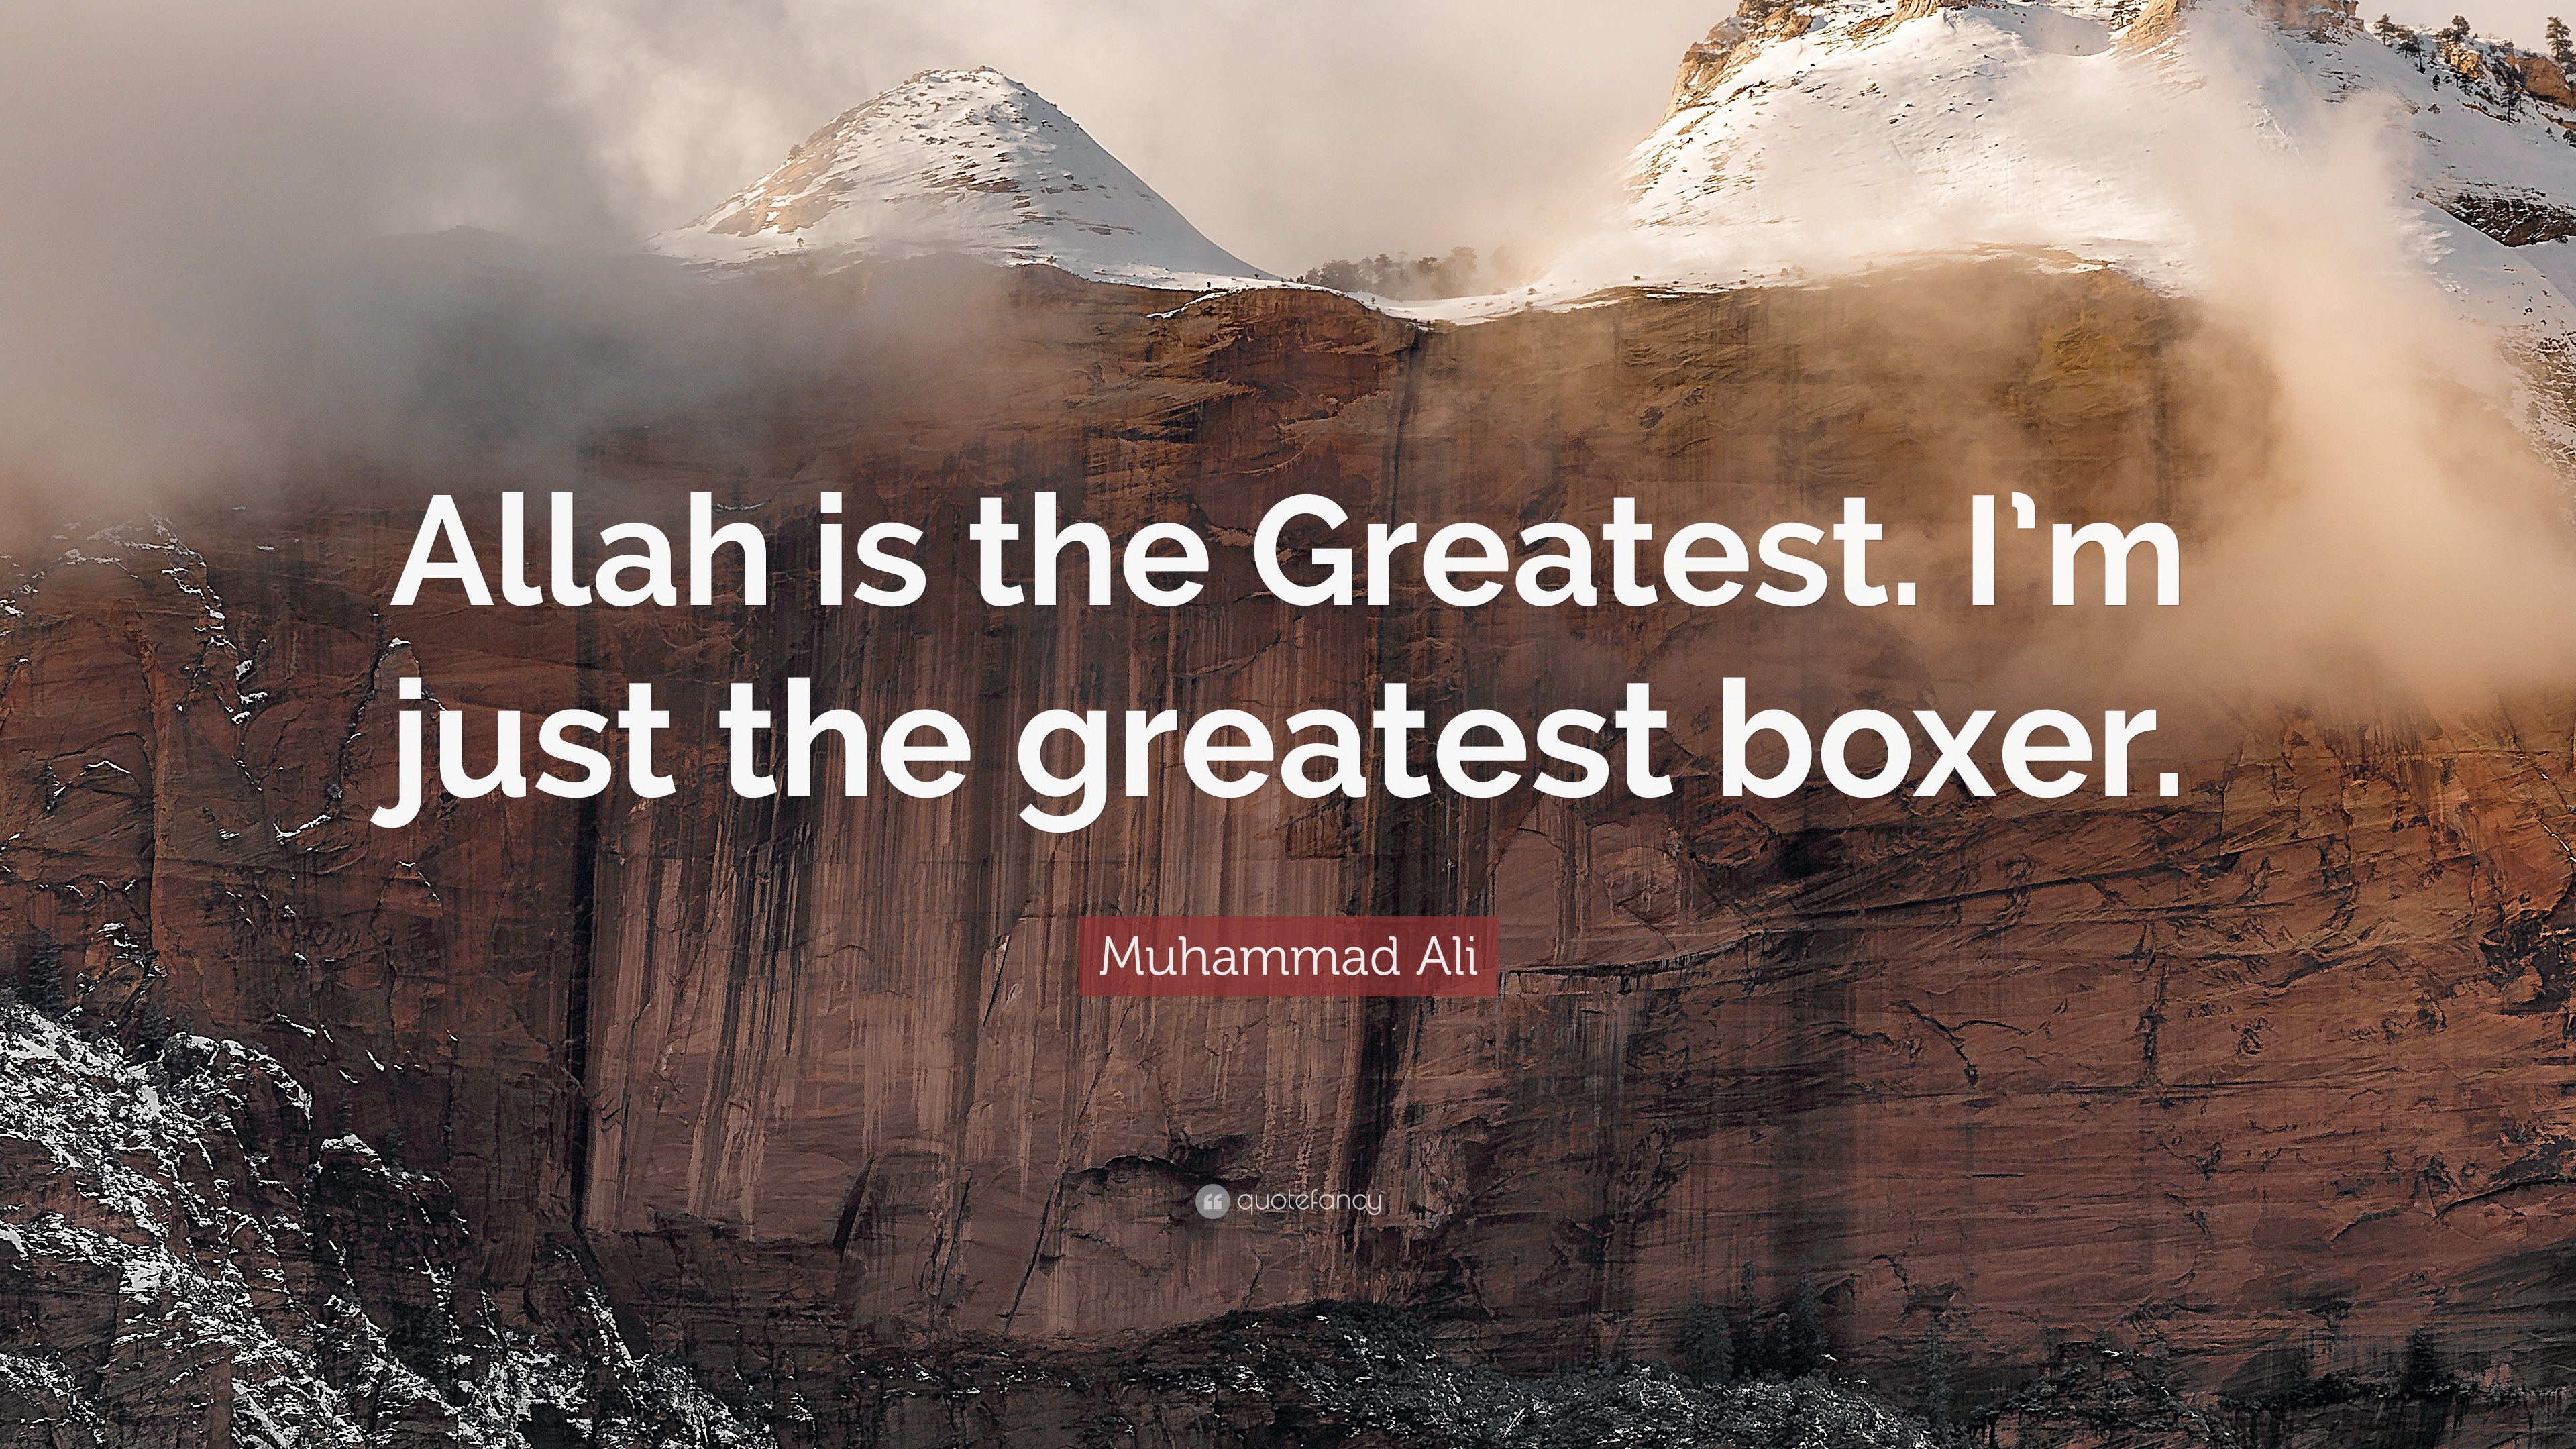 Muhammad Ali Quote: â€œAllah is the Greatest. Iâ€™m just the greatest boxer.â€